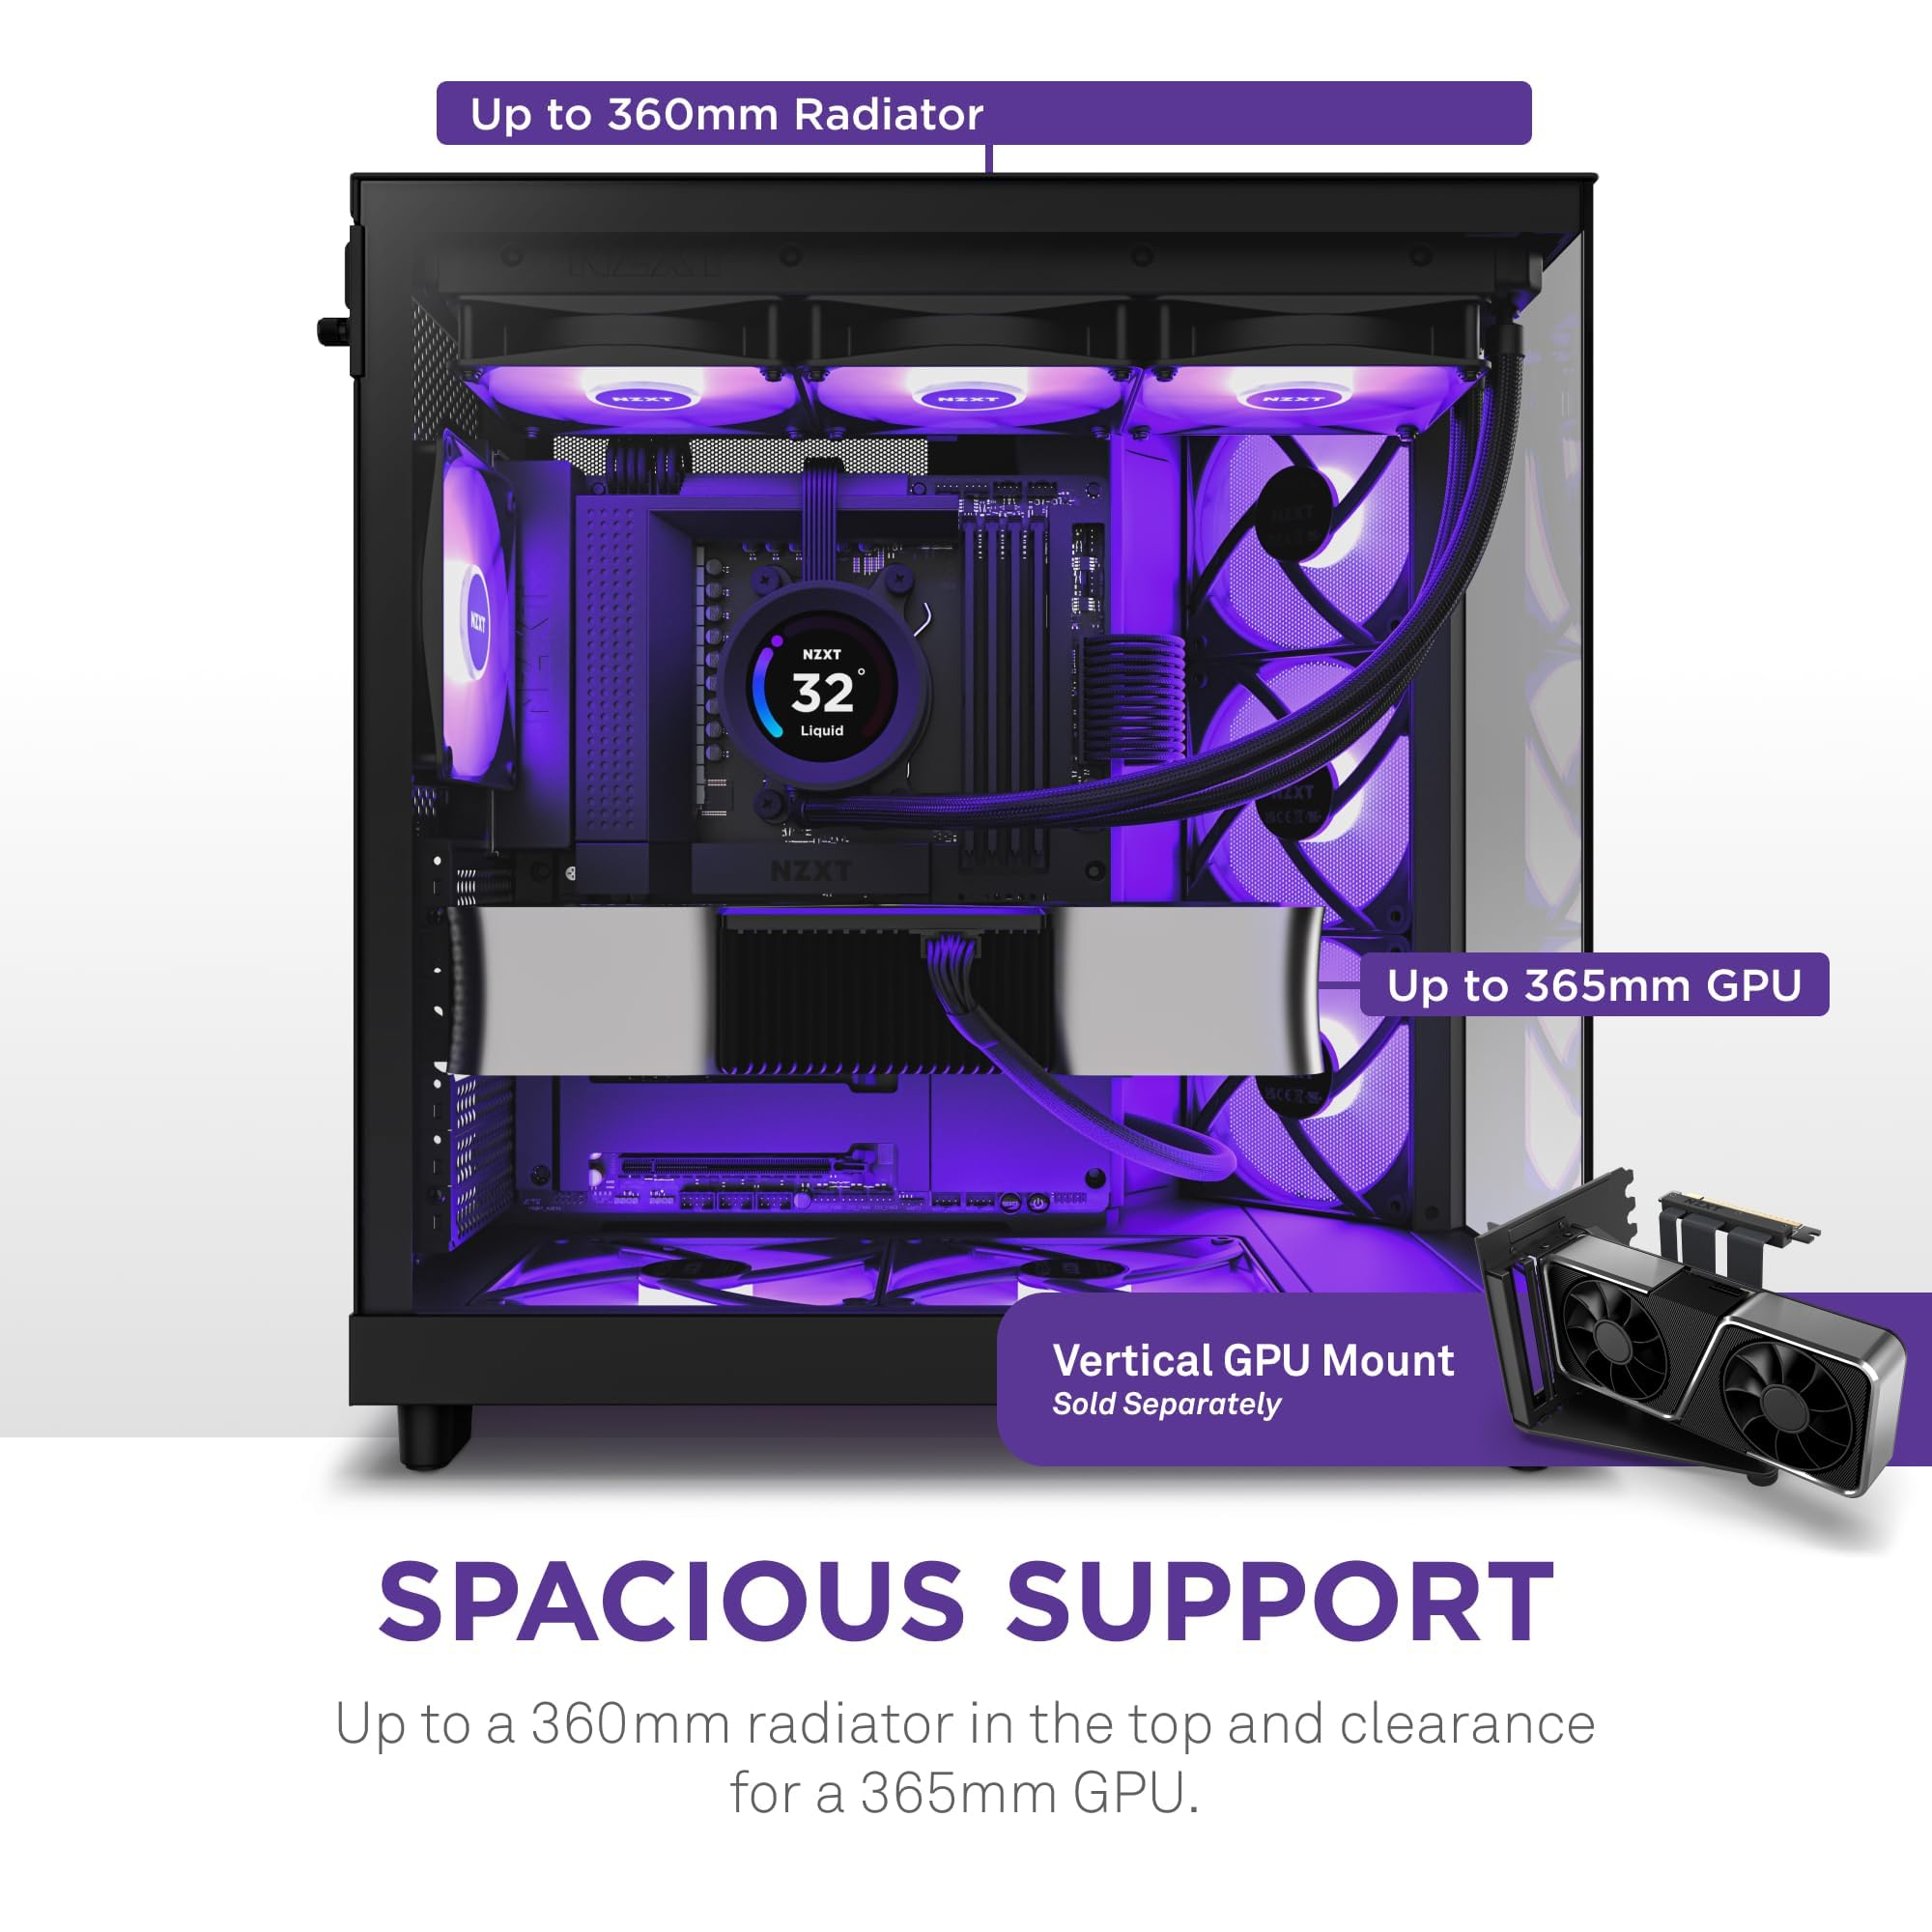 NZXT H6 Flow RGB | CC-H61FB-R1 | Compact Dual-Chamber Mid-Tower Airflow Case | Includes 3 x 120mm RGB Fans | Panoramic Glass Panels | High-Performance Airflow Panels | Cable Management | Black